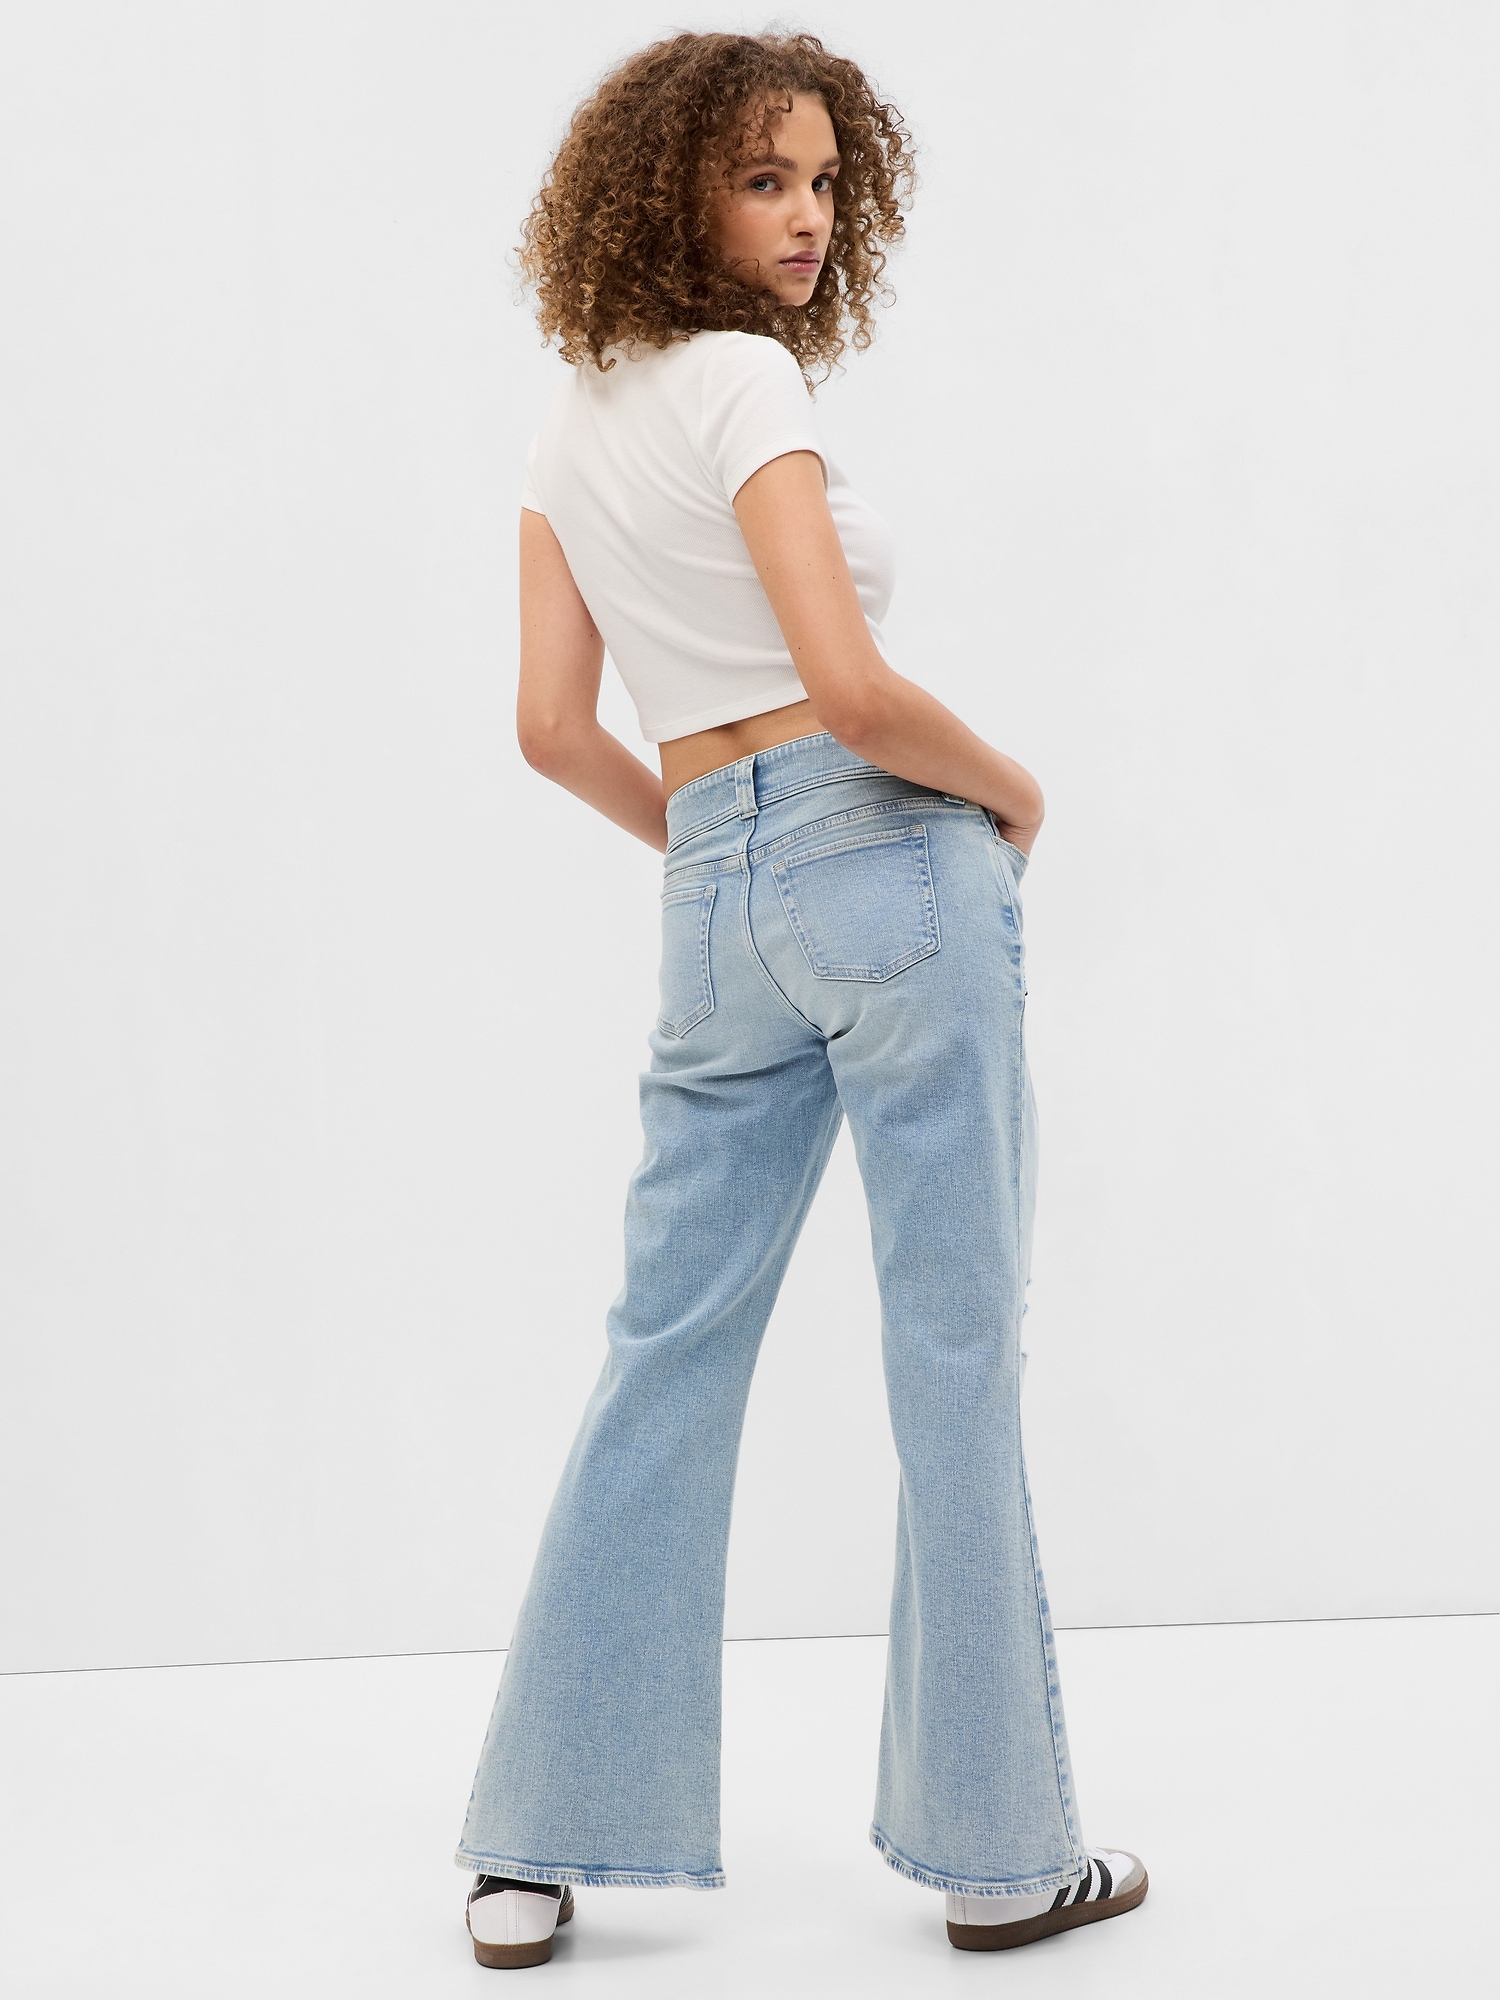 Vintage Wash Y2K Flare Jeans  Clothes, Fashion outfits, Jeans online store